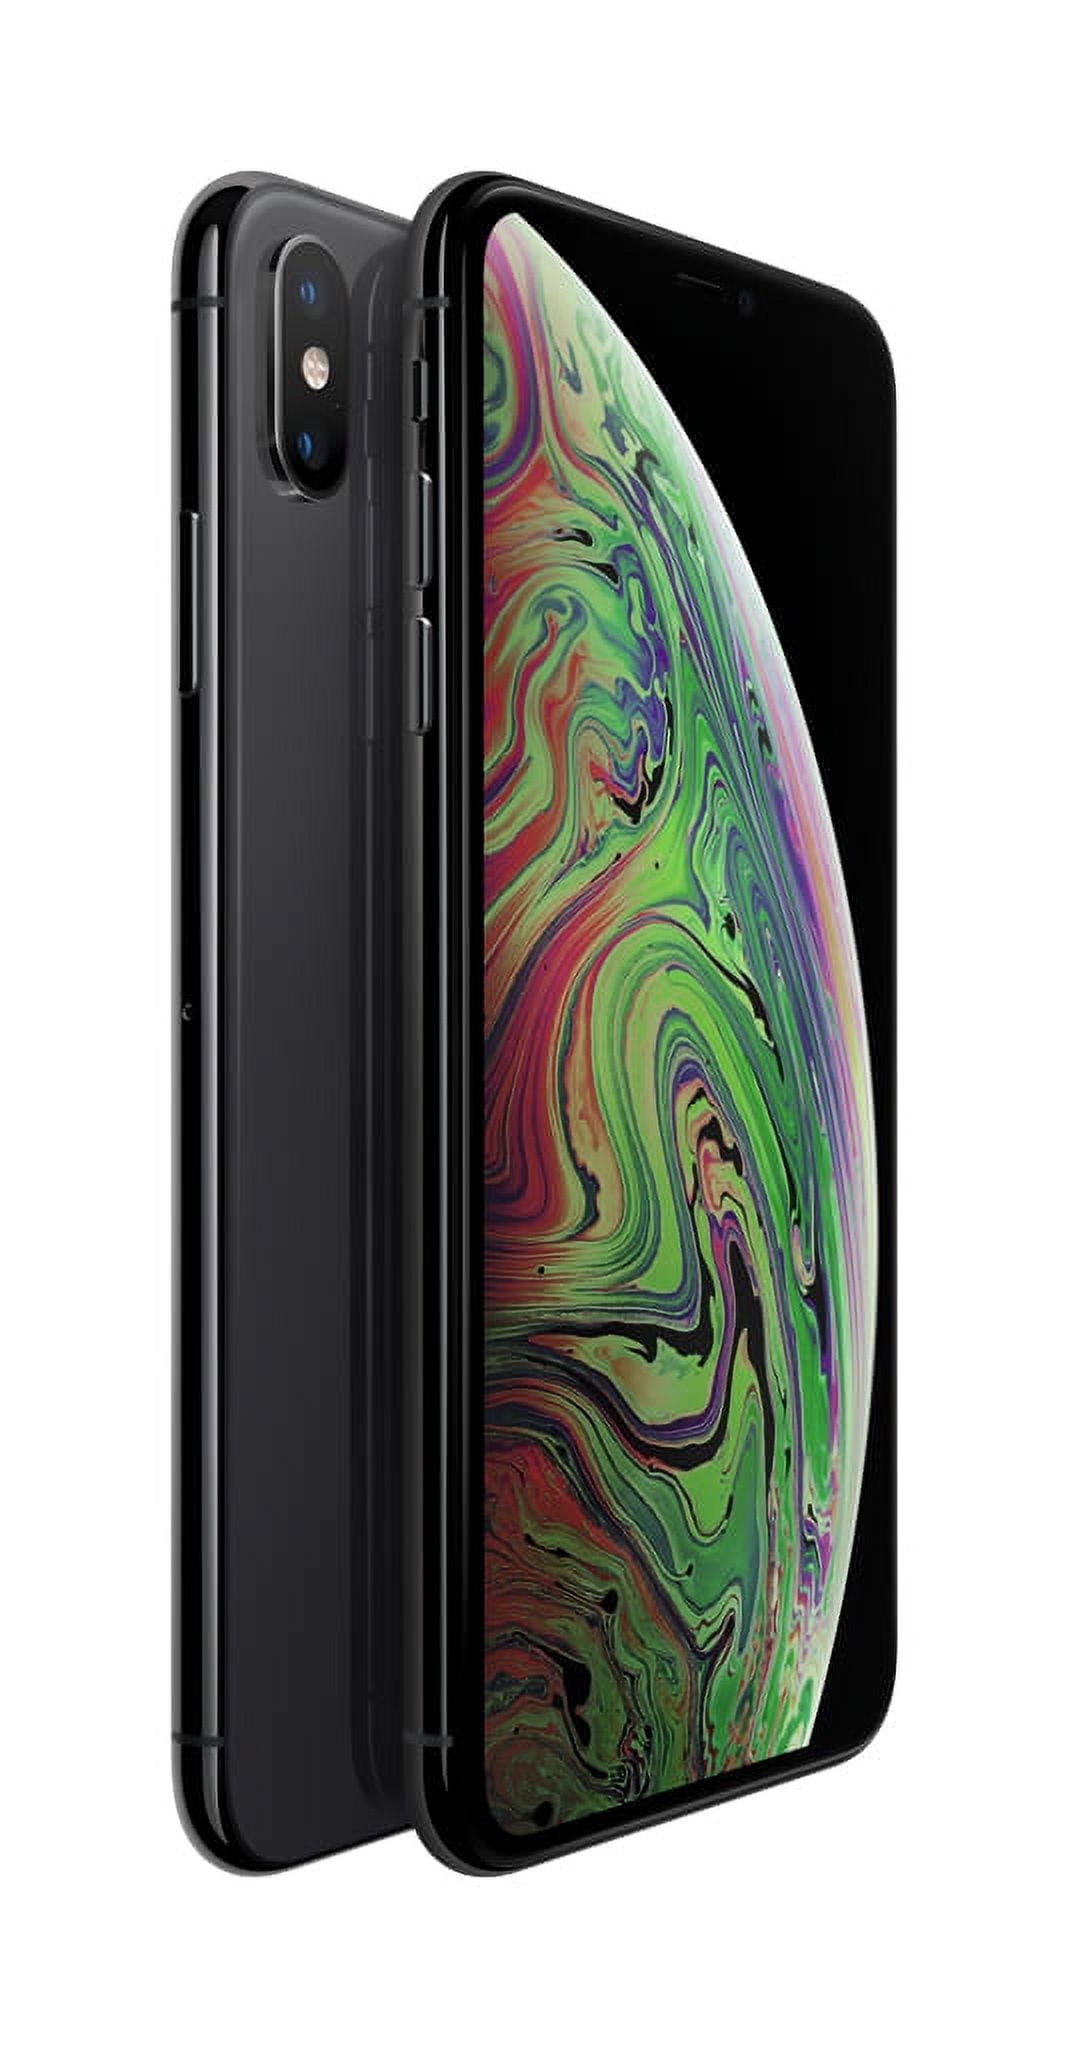 AT&T Apple iPhone XS Max 64GB, Space Gray - Upgrade Only - Walmart.com